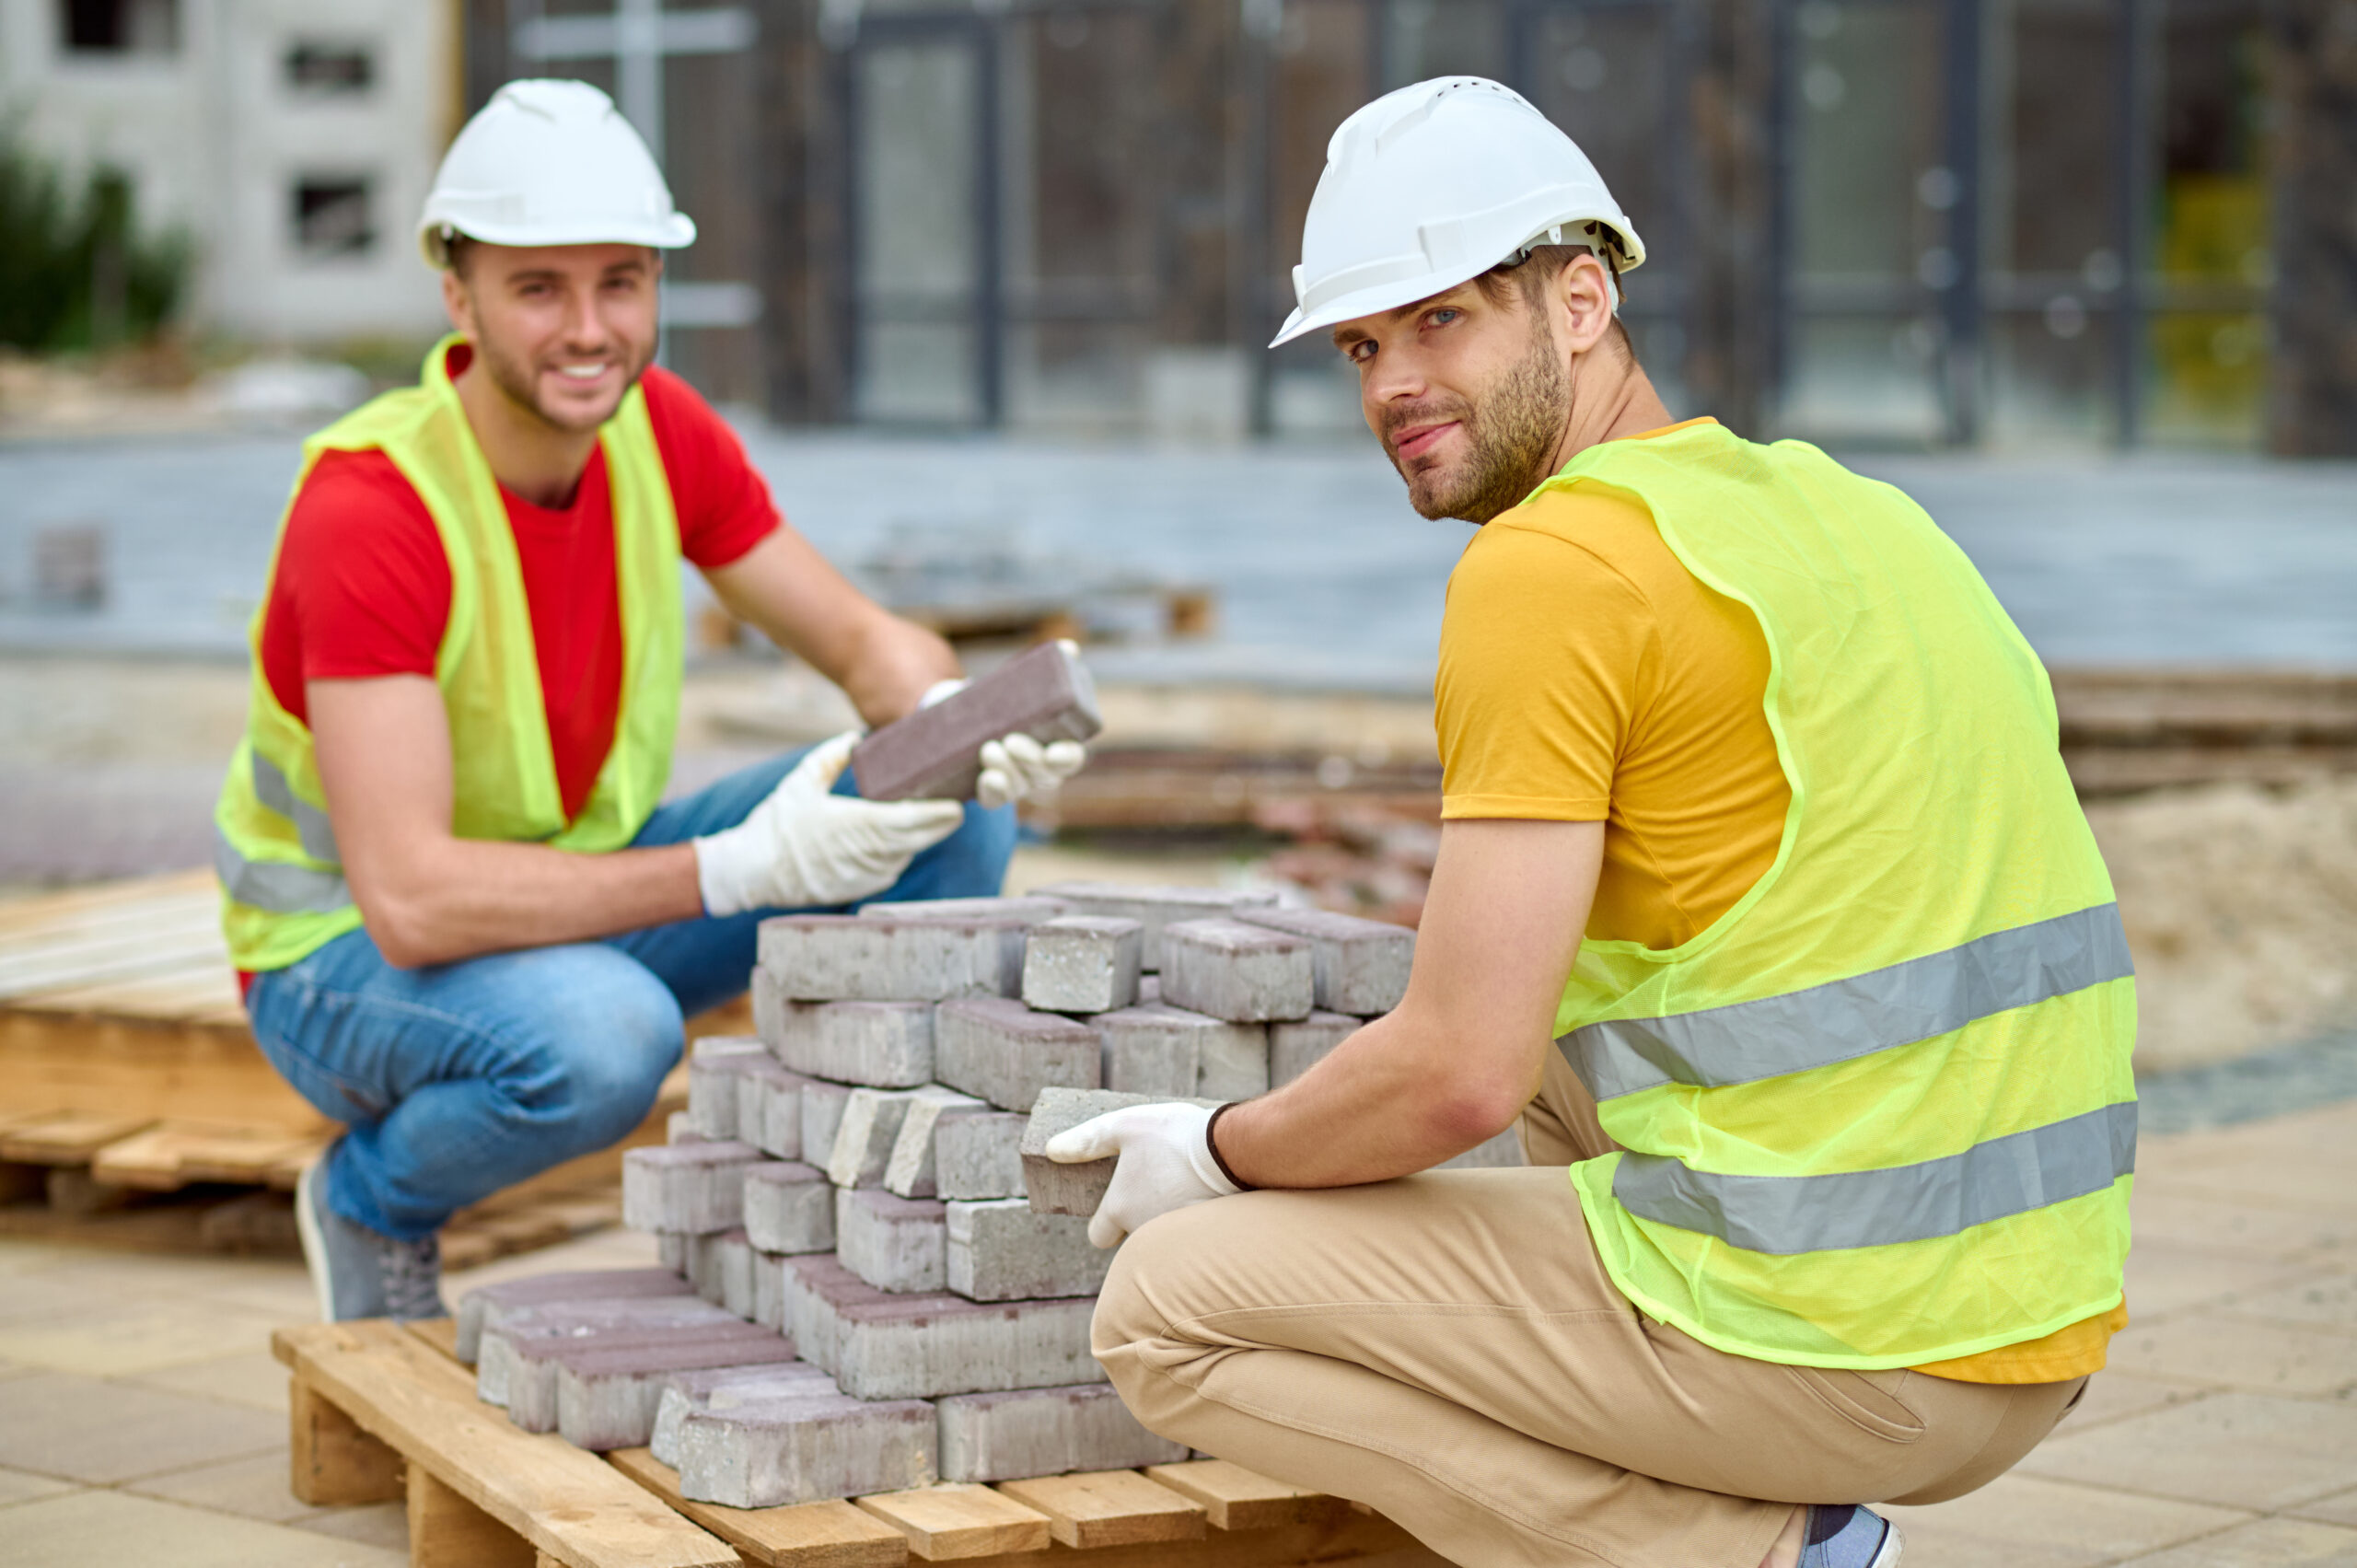 Two workers stacking bricks looking at camera